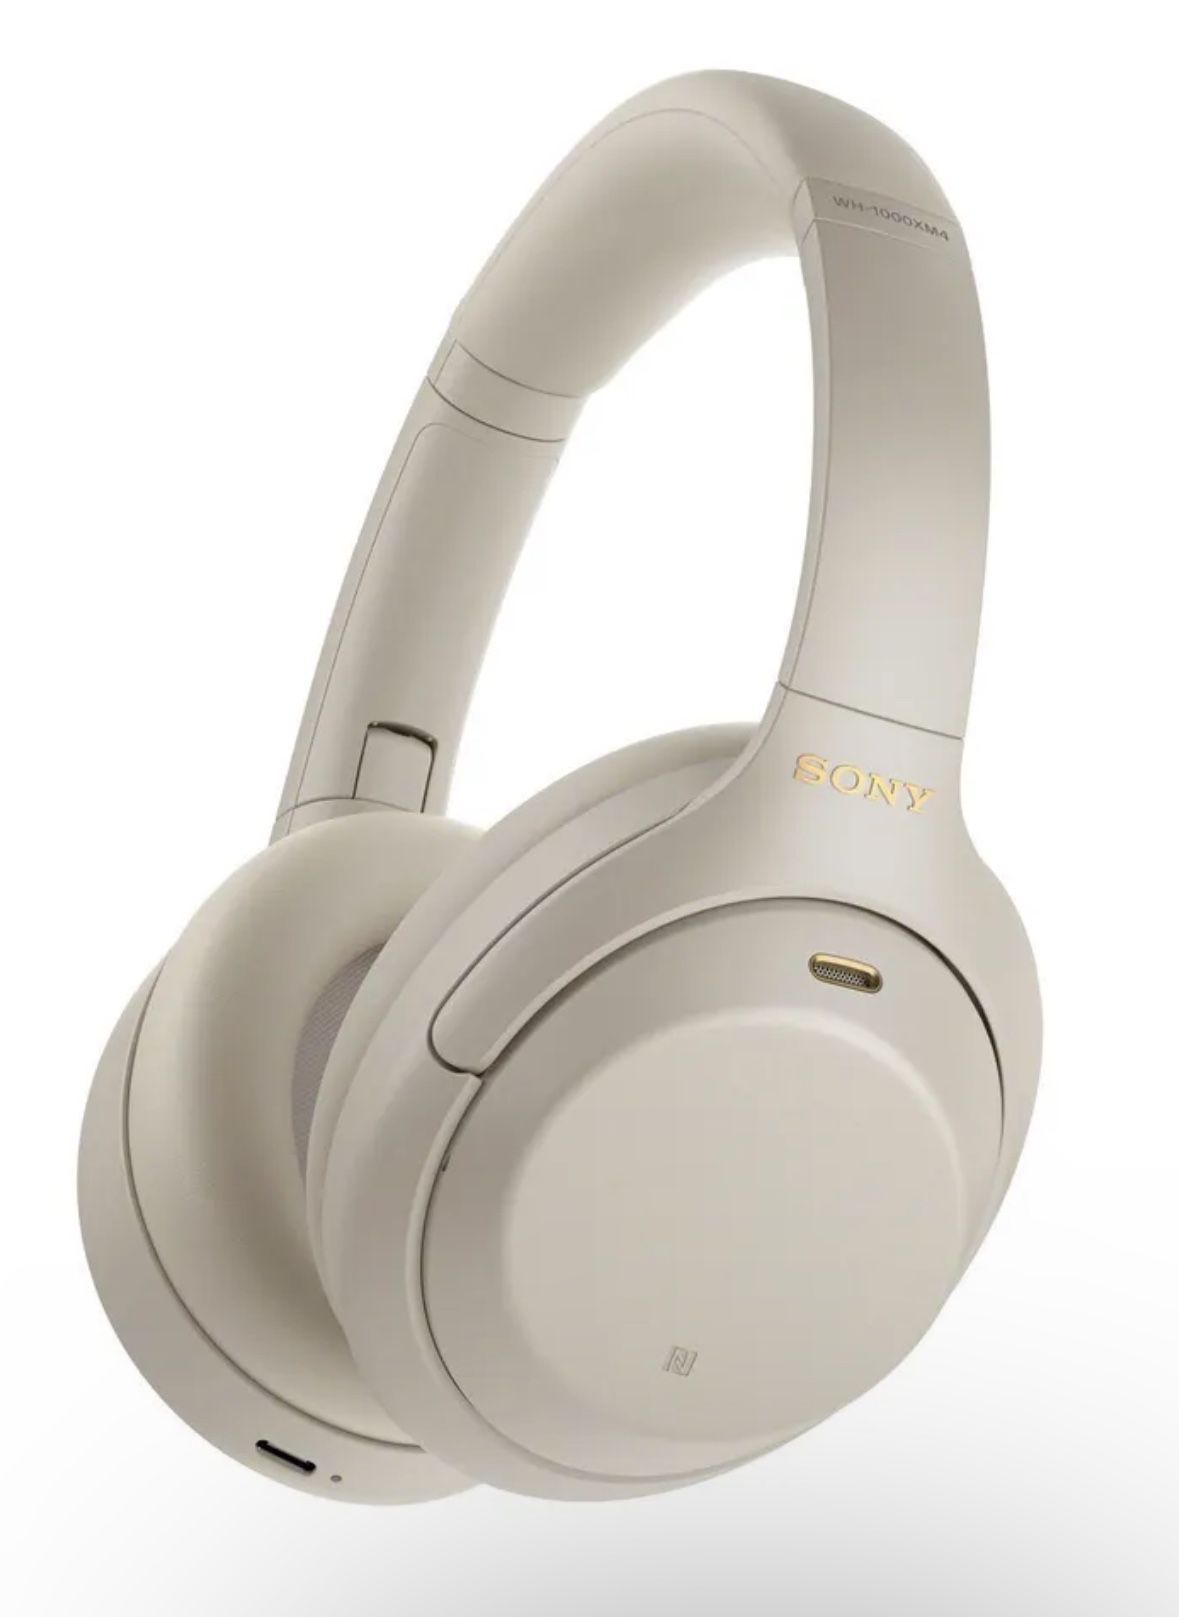 Sony WH-1000XM3 Wireless Noise-Cancelling Over the Ear Headphones - Silver